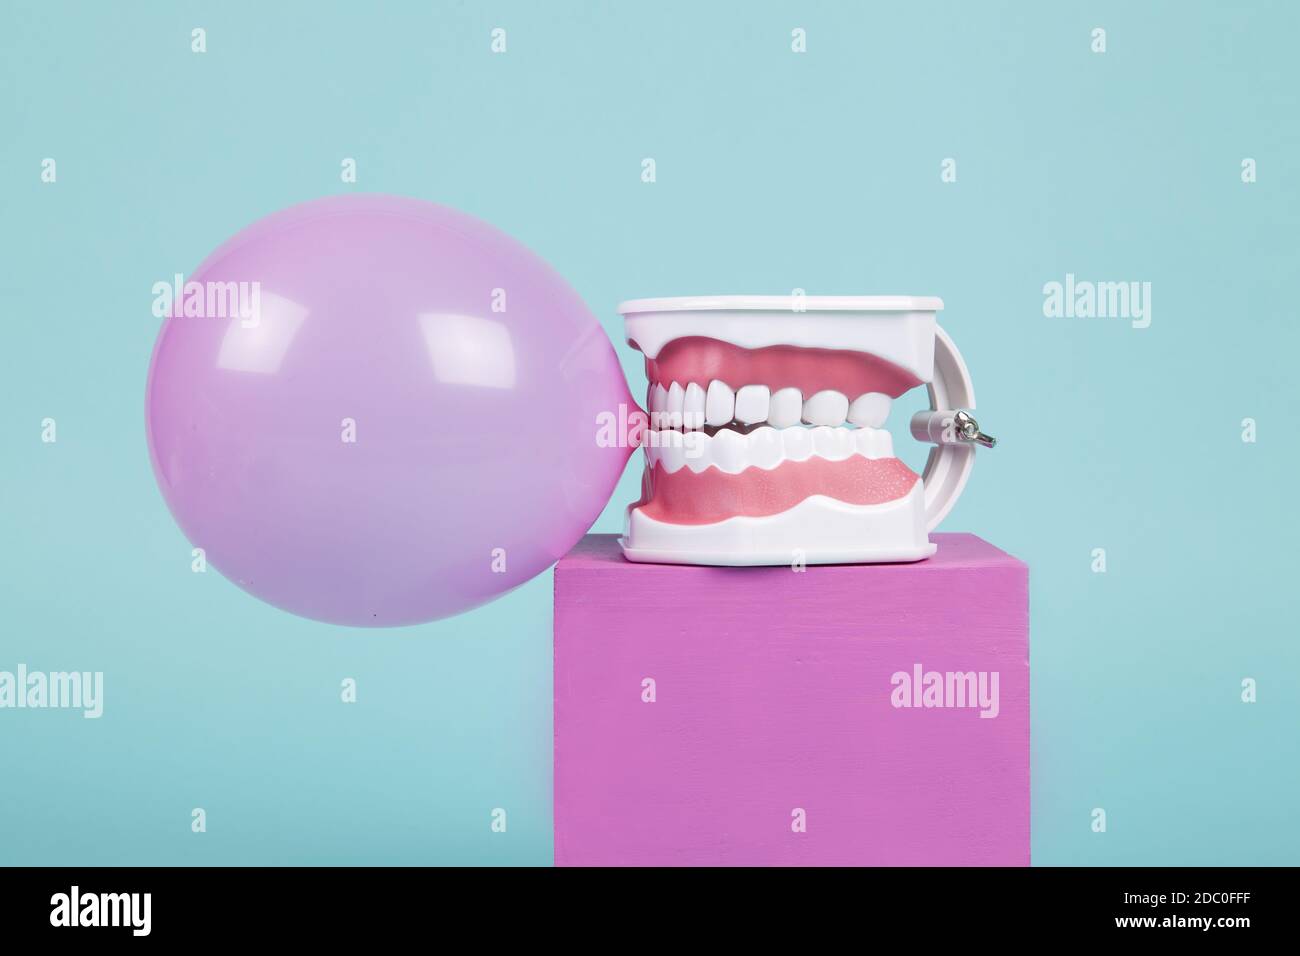 an anatomical plastic tooth model to learn how to brush teeth holding a chewing gum ball on coloured cubes. Offbeat humor and pop atmosphere. minimal Stock Photo